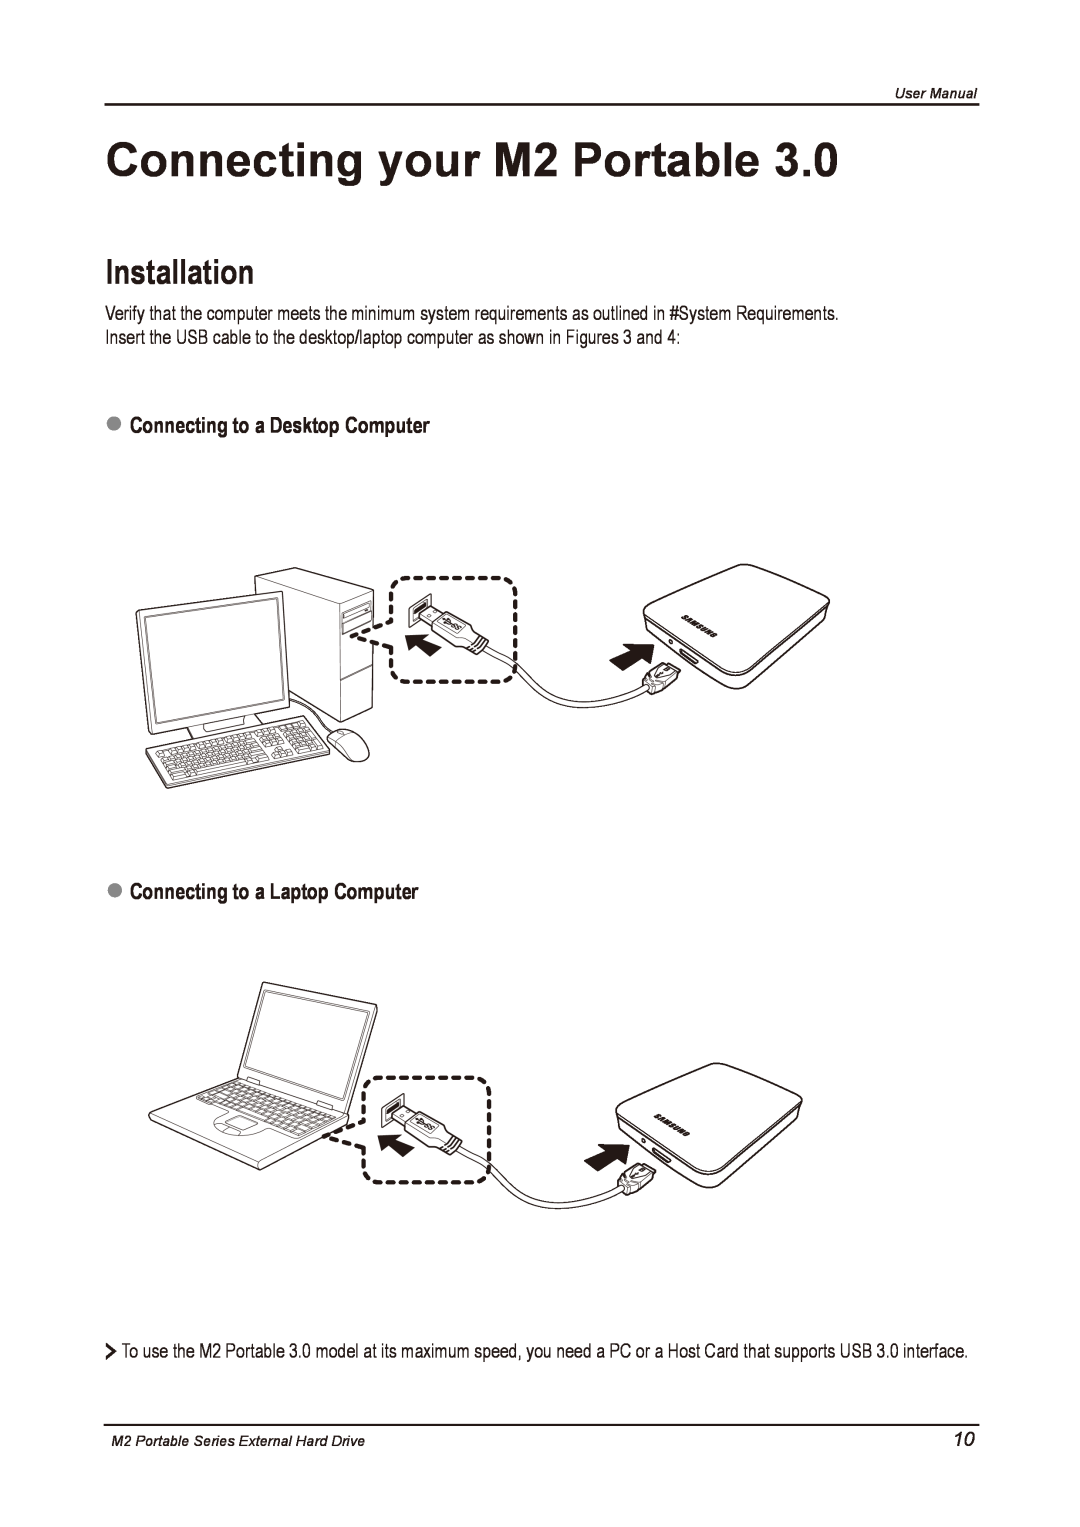 Samsung HX-M500UAY Connecting your M2 Portable, Installation, User Manual, M2 Portable Series External Hard Drive 